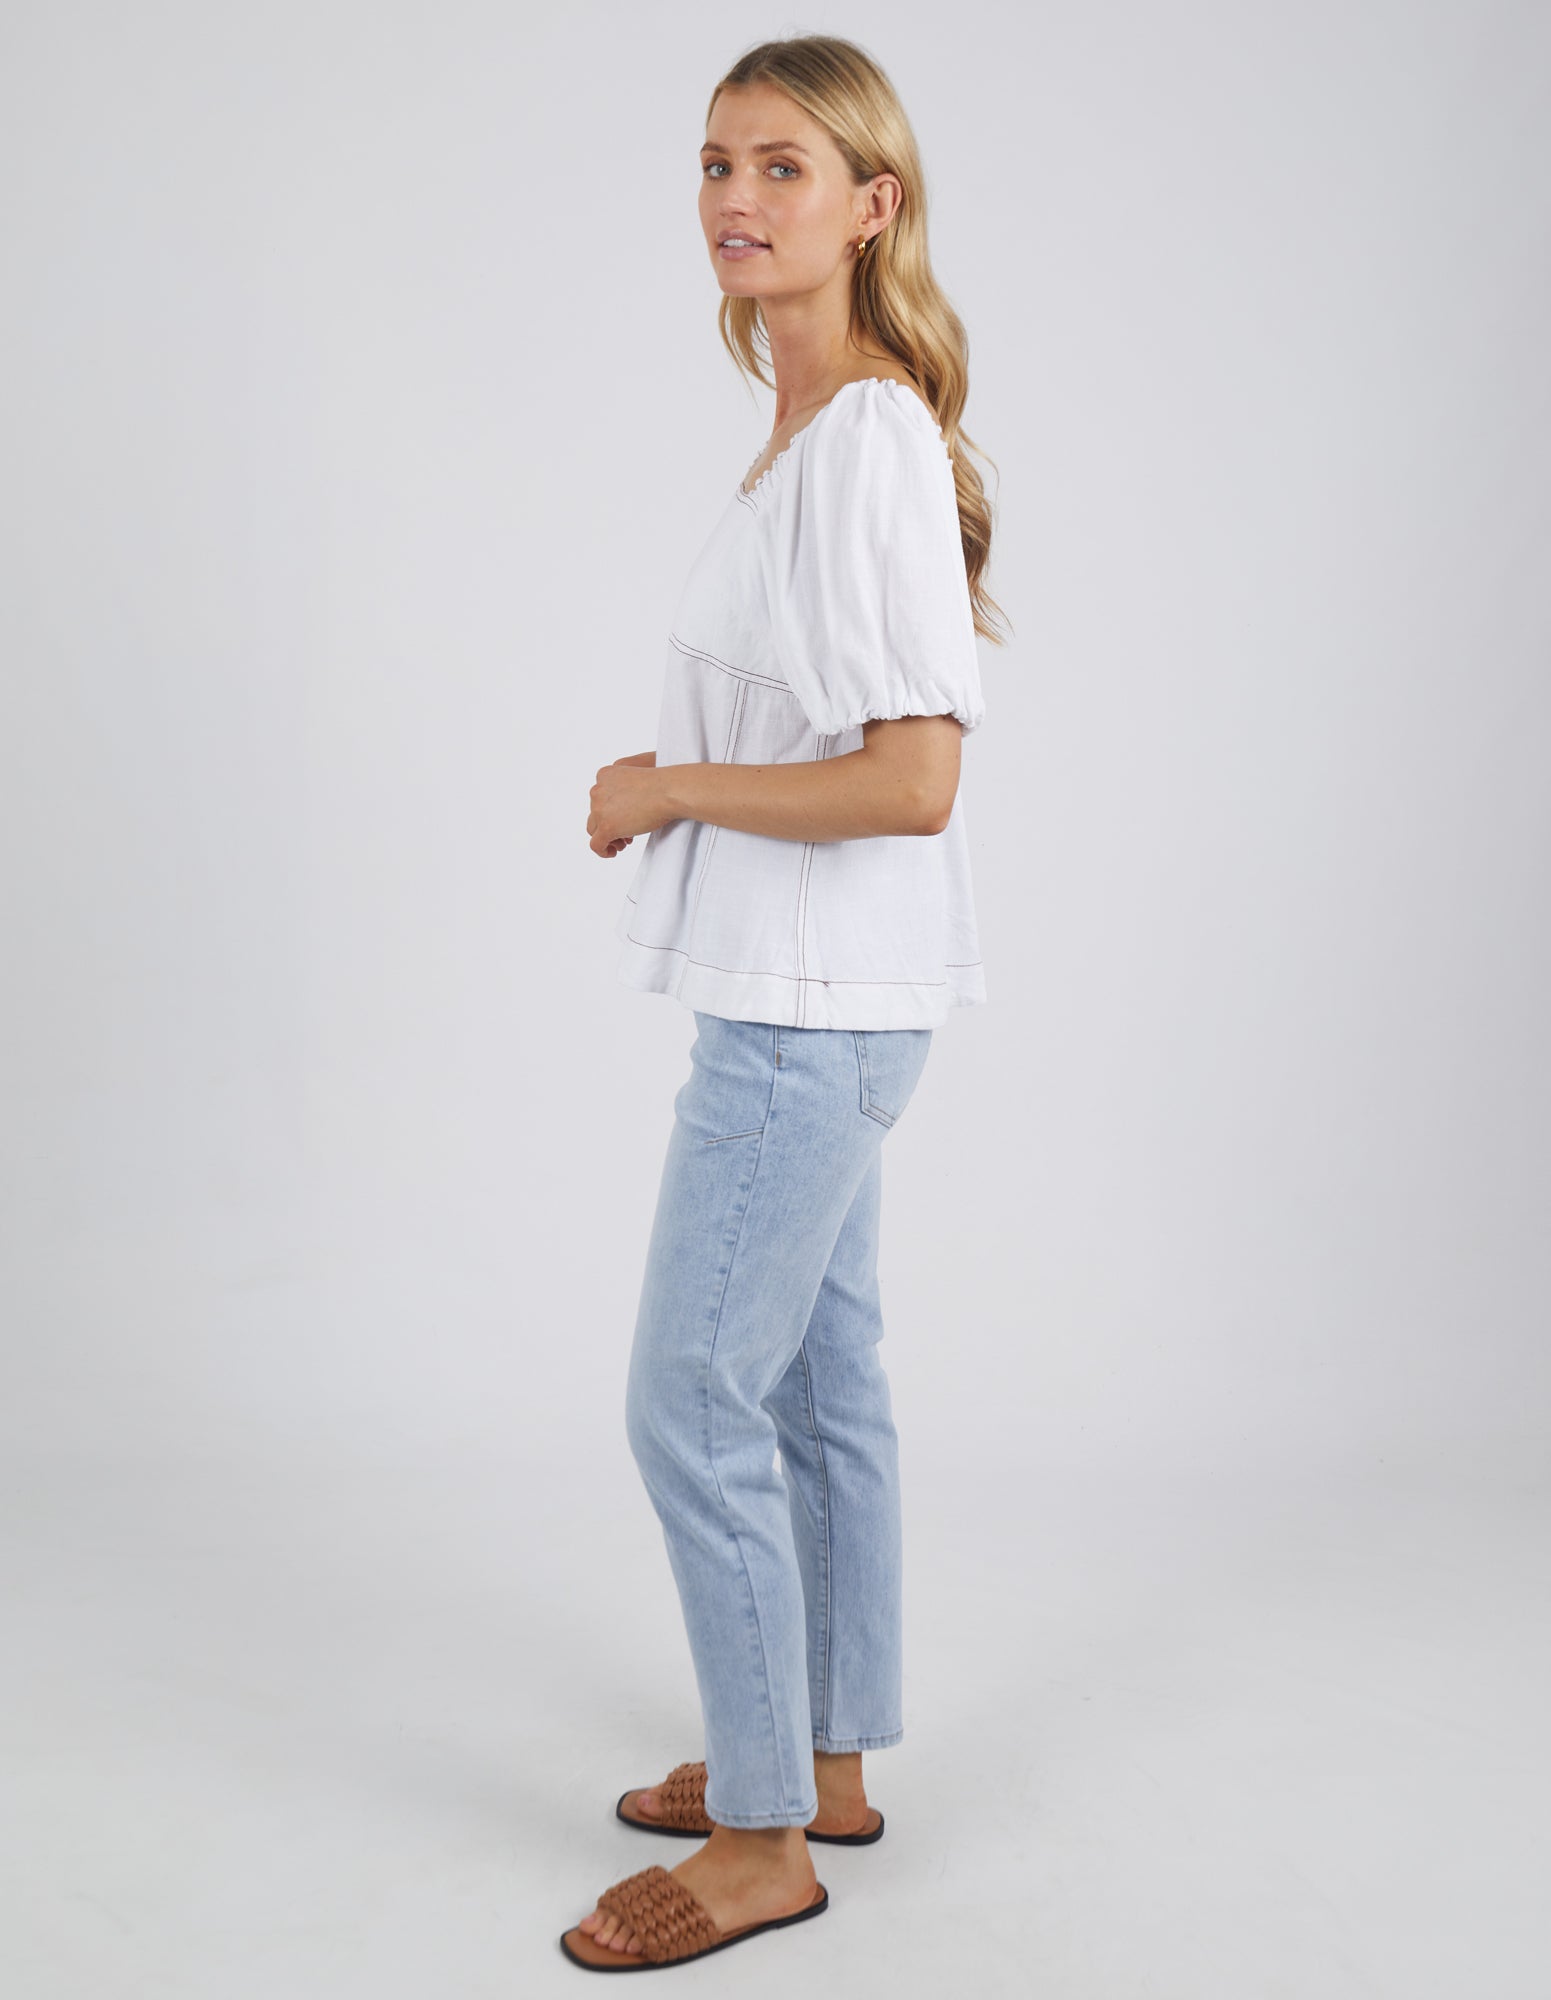 FOXWOOD FLORENCE TOP - WHITE